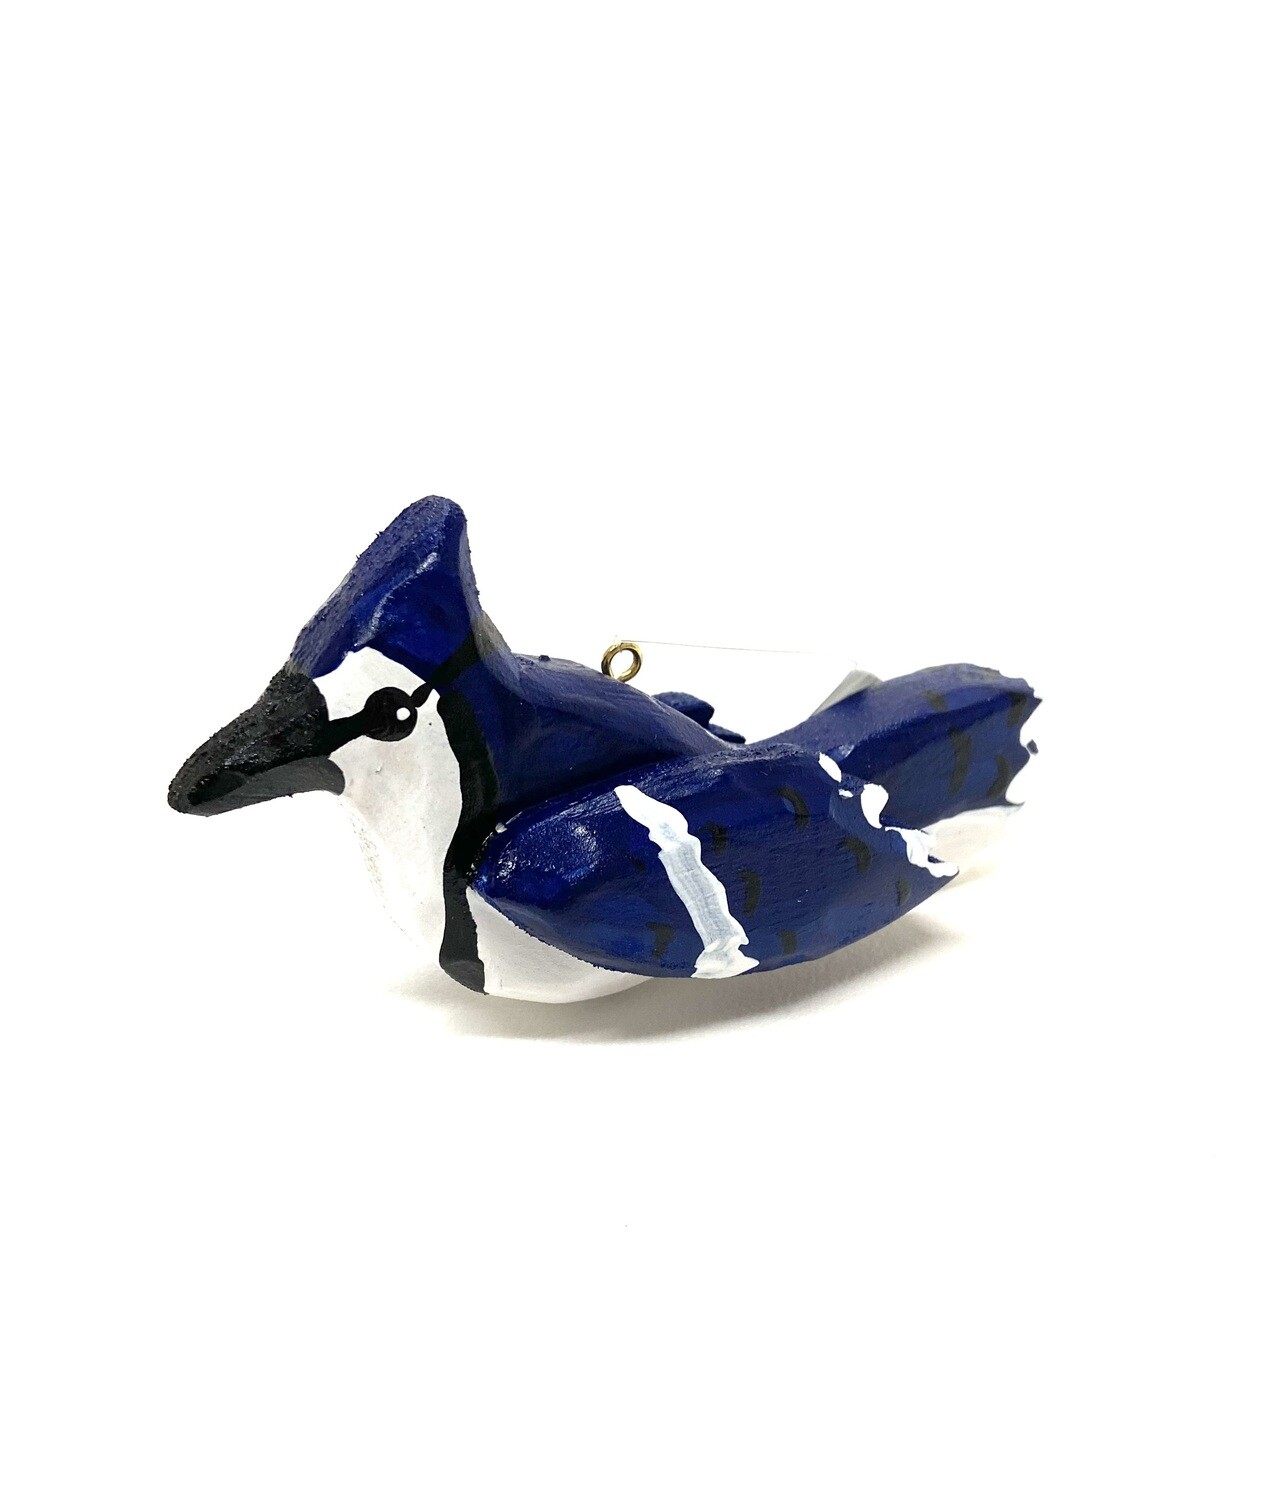 Blue Jay Ornament- Timberdoodle